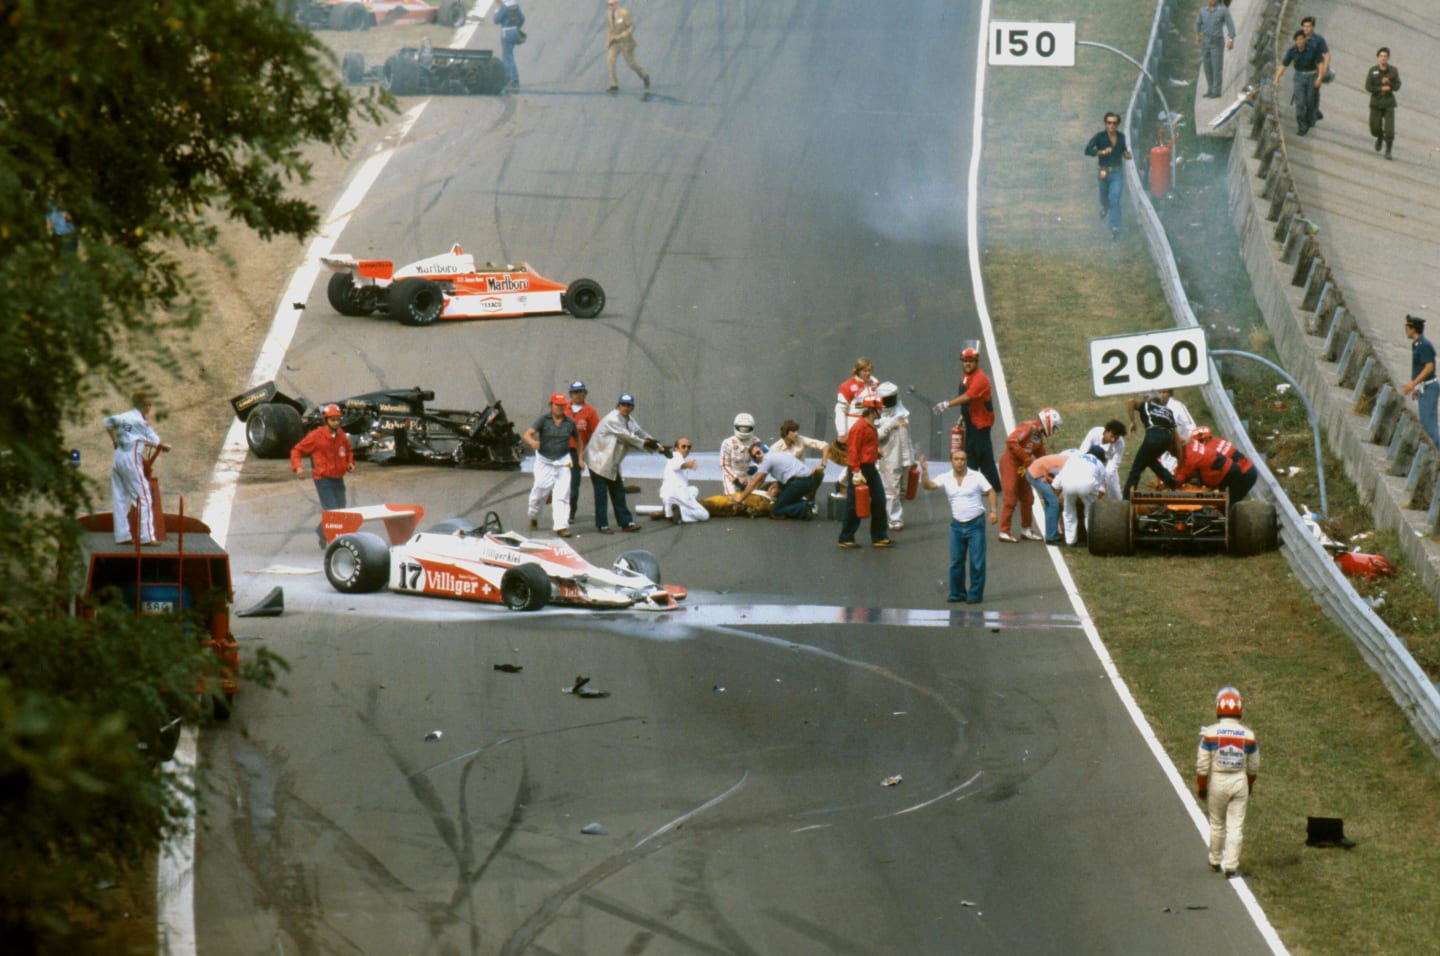 The aftermath of the first lap accident. Ronnie Peterson who later died from his injuries is lying